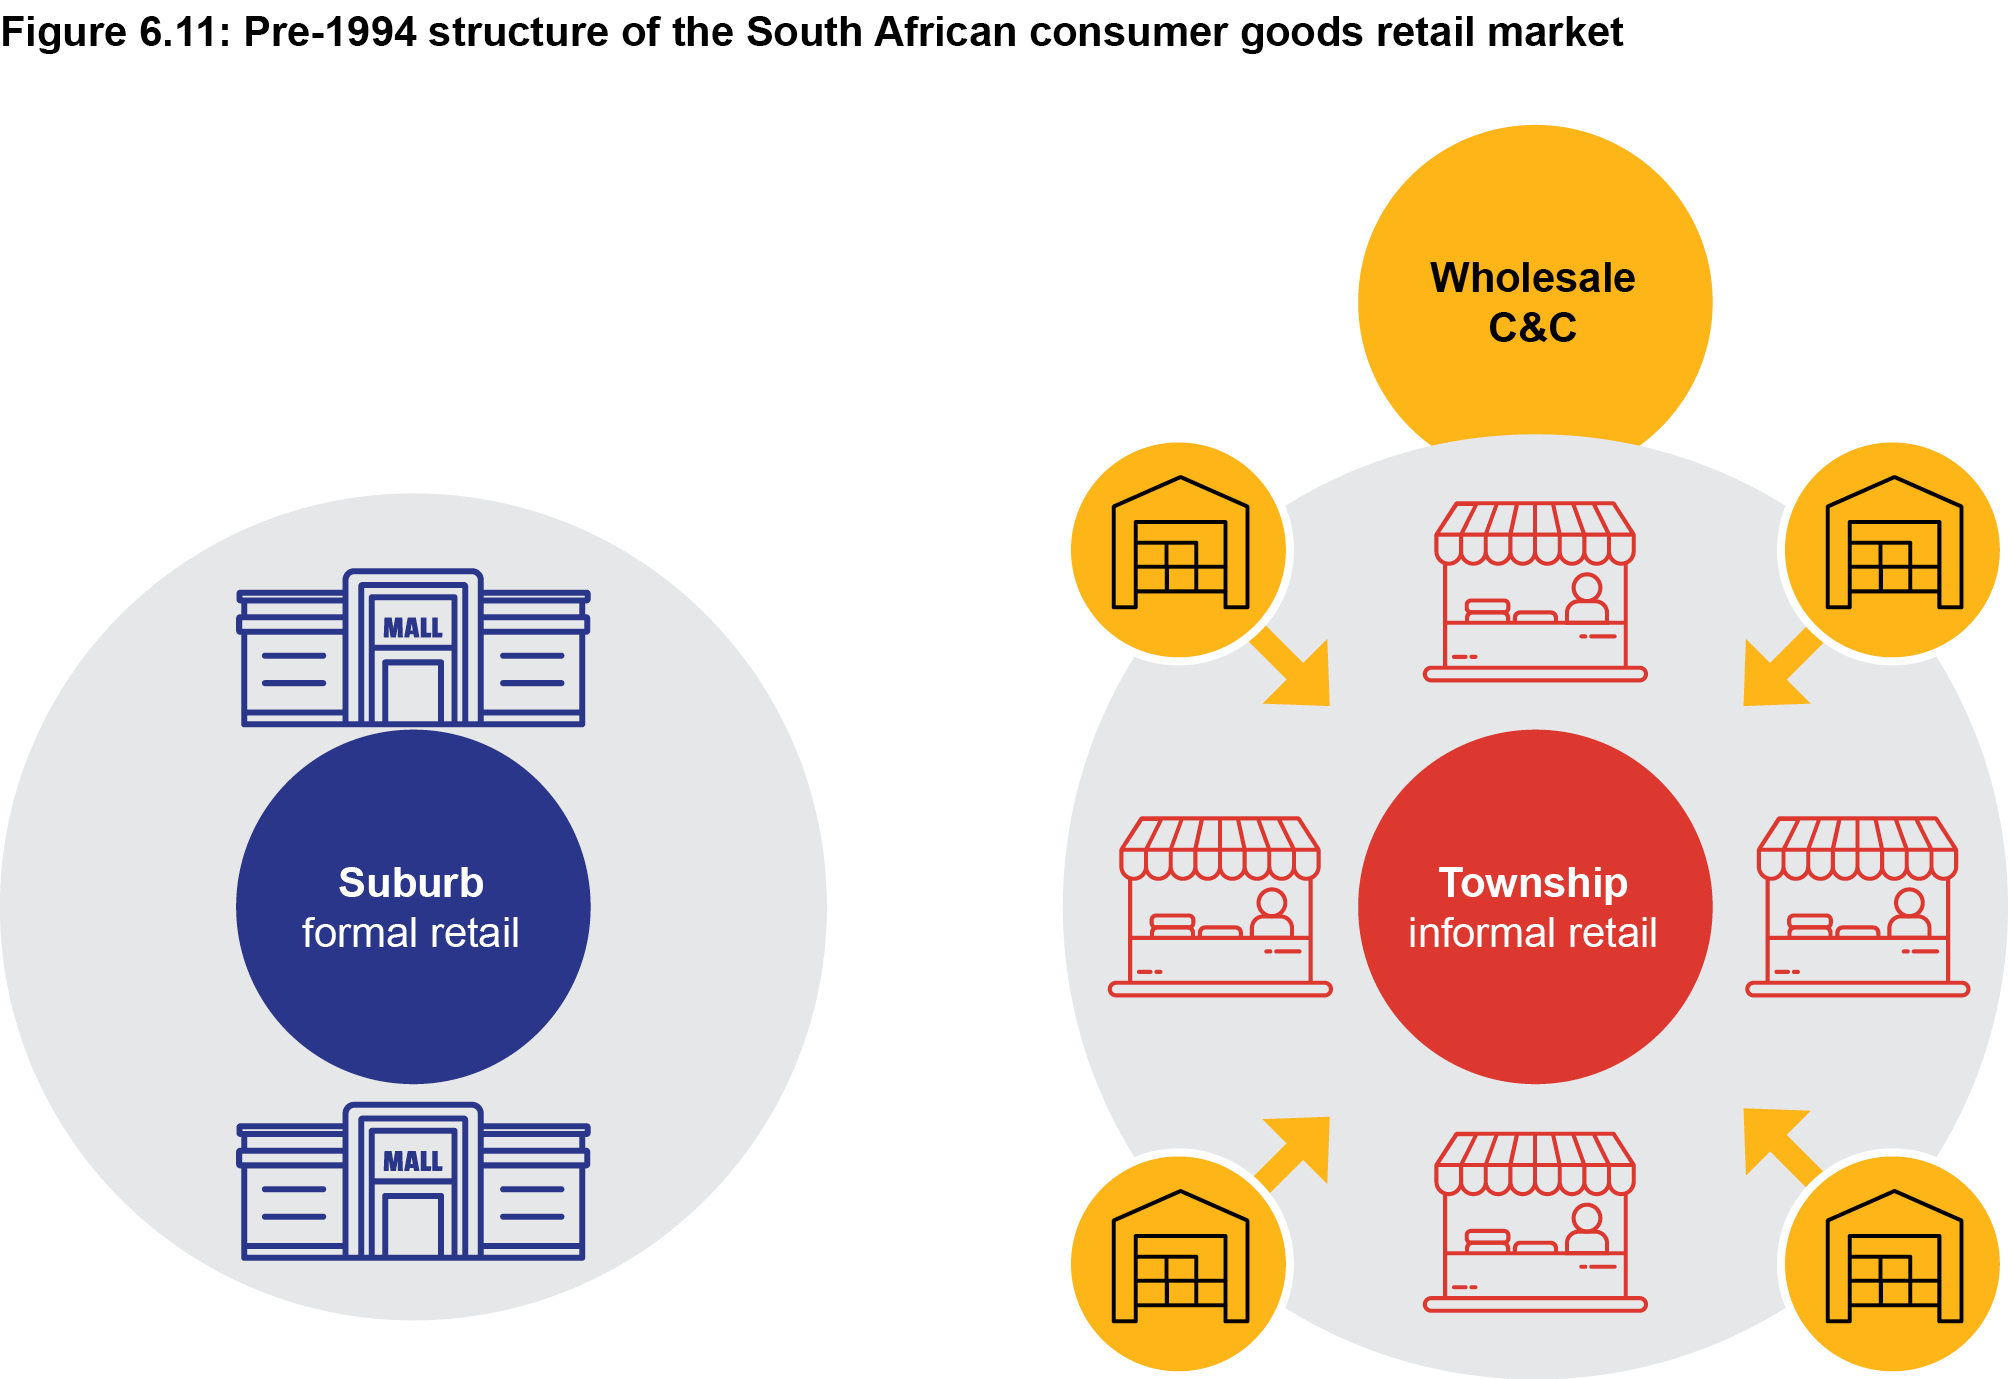 Figure 6.11: Pre-1994 structure of the South African consumer market